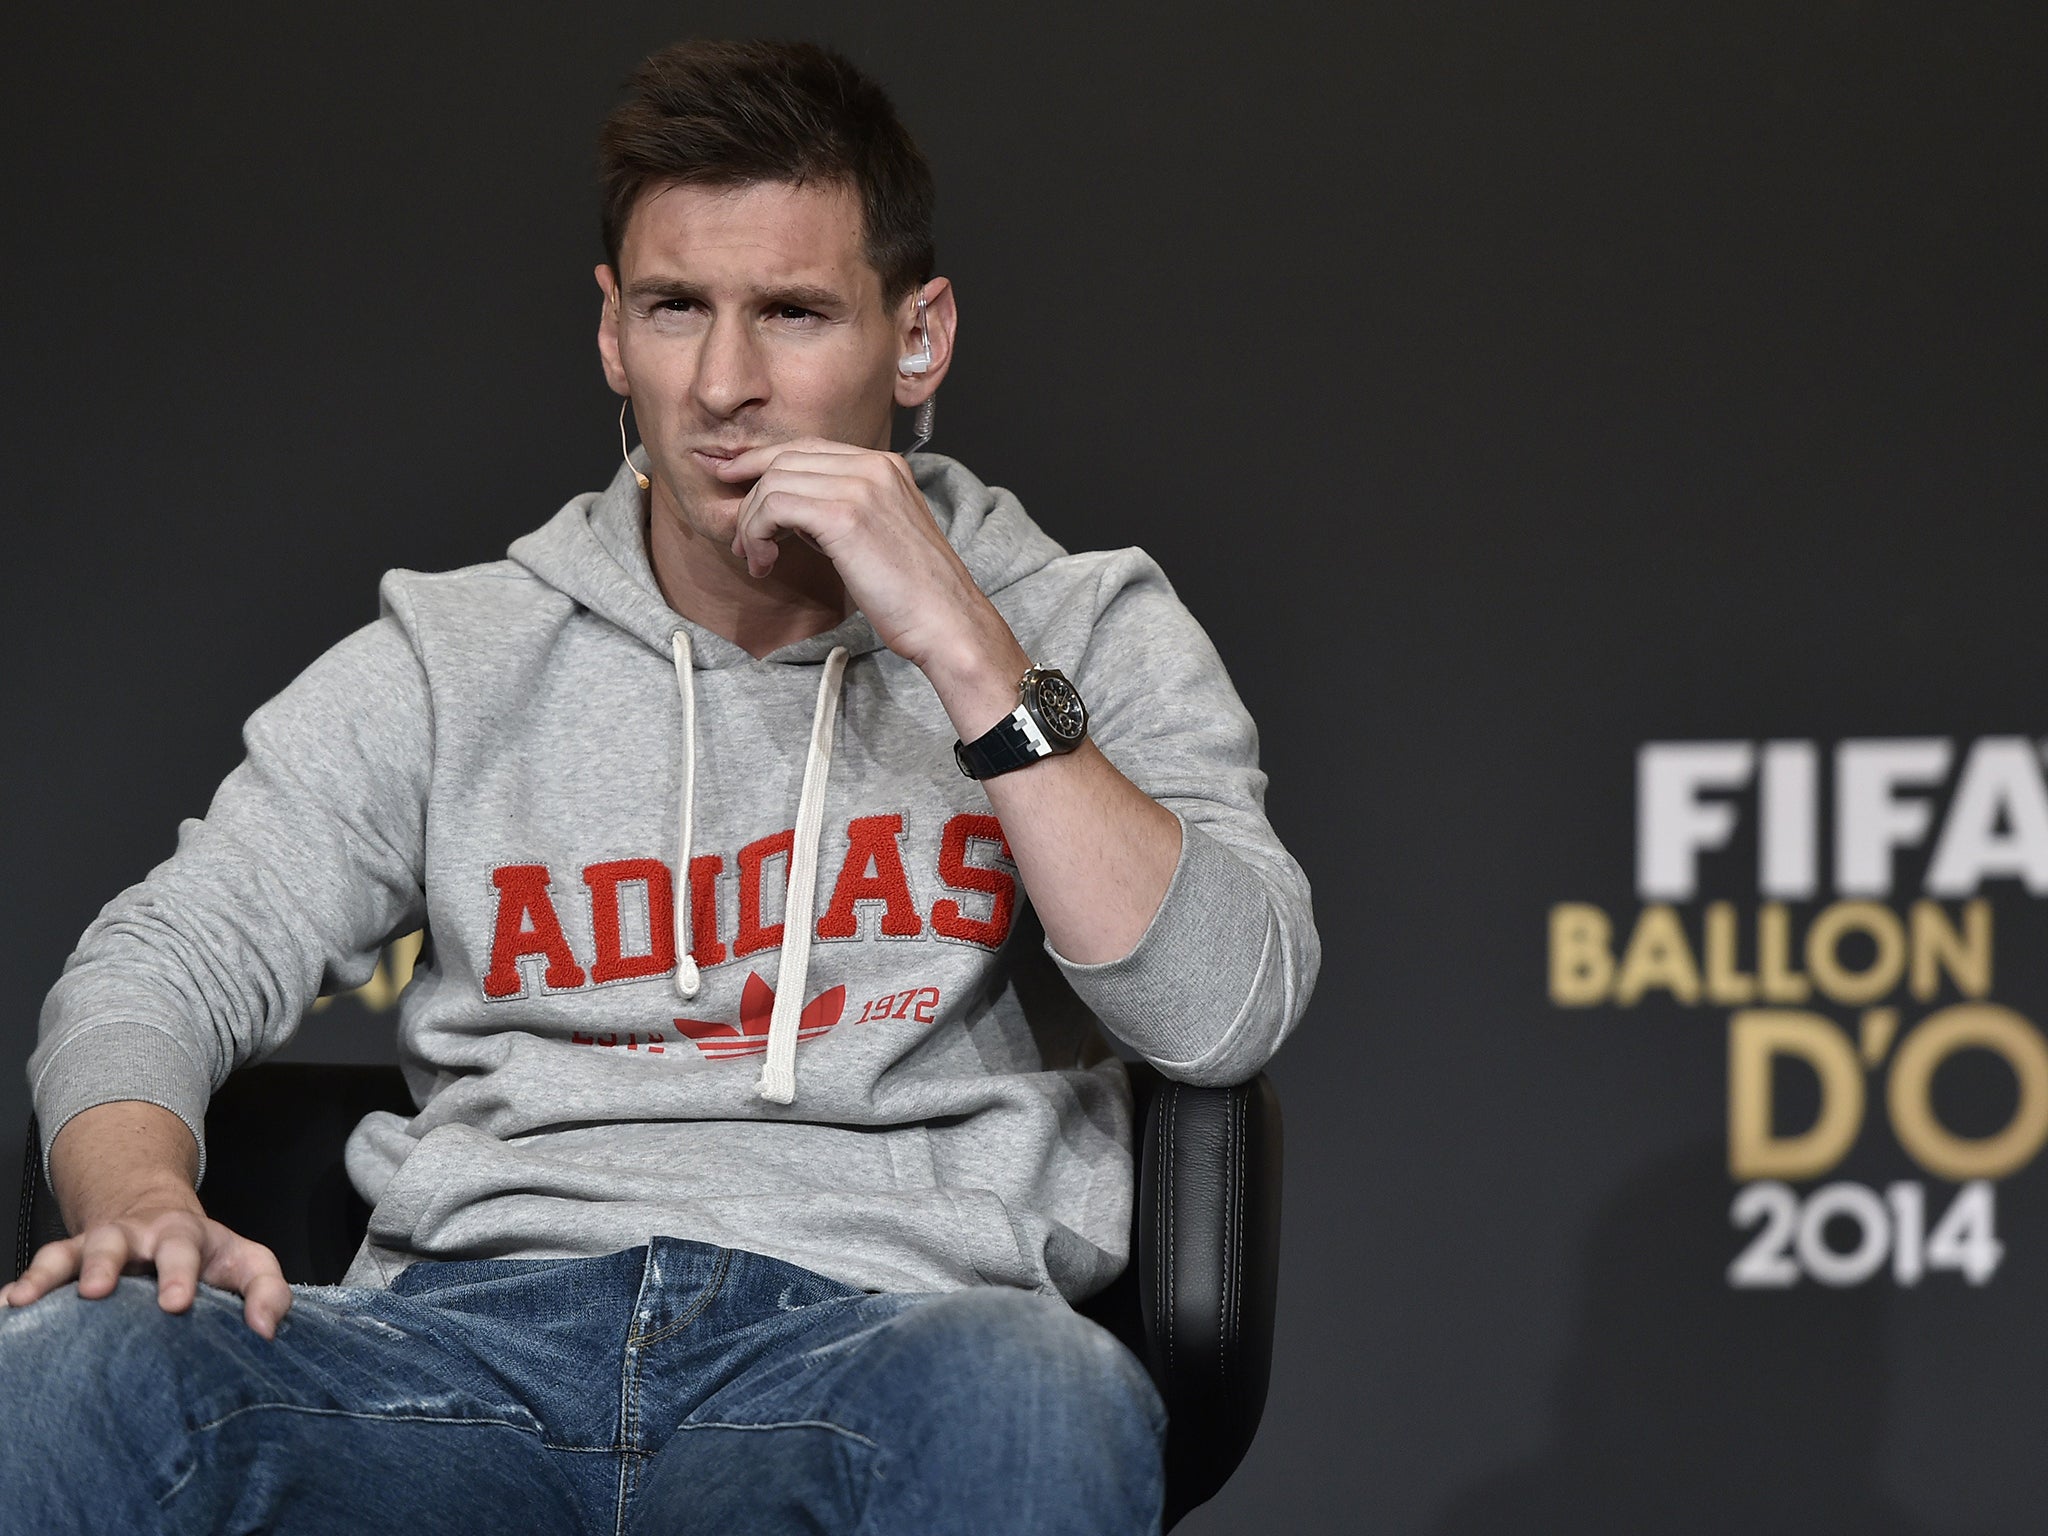 Lionel Messi ahead of the Fifa Ballon d'Or awards